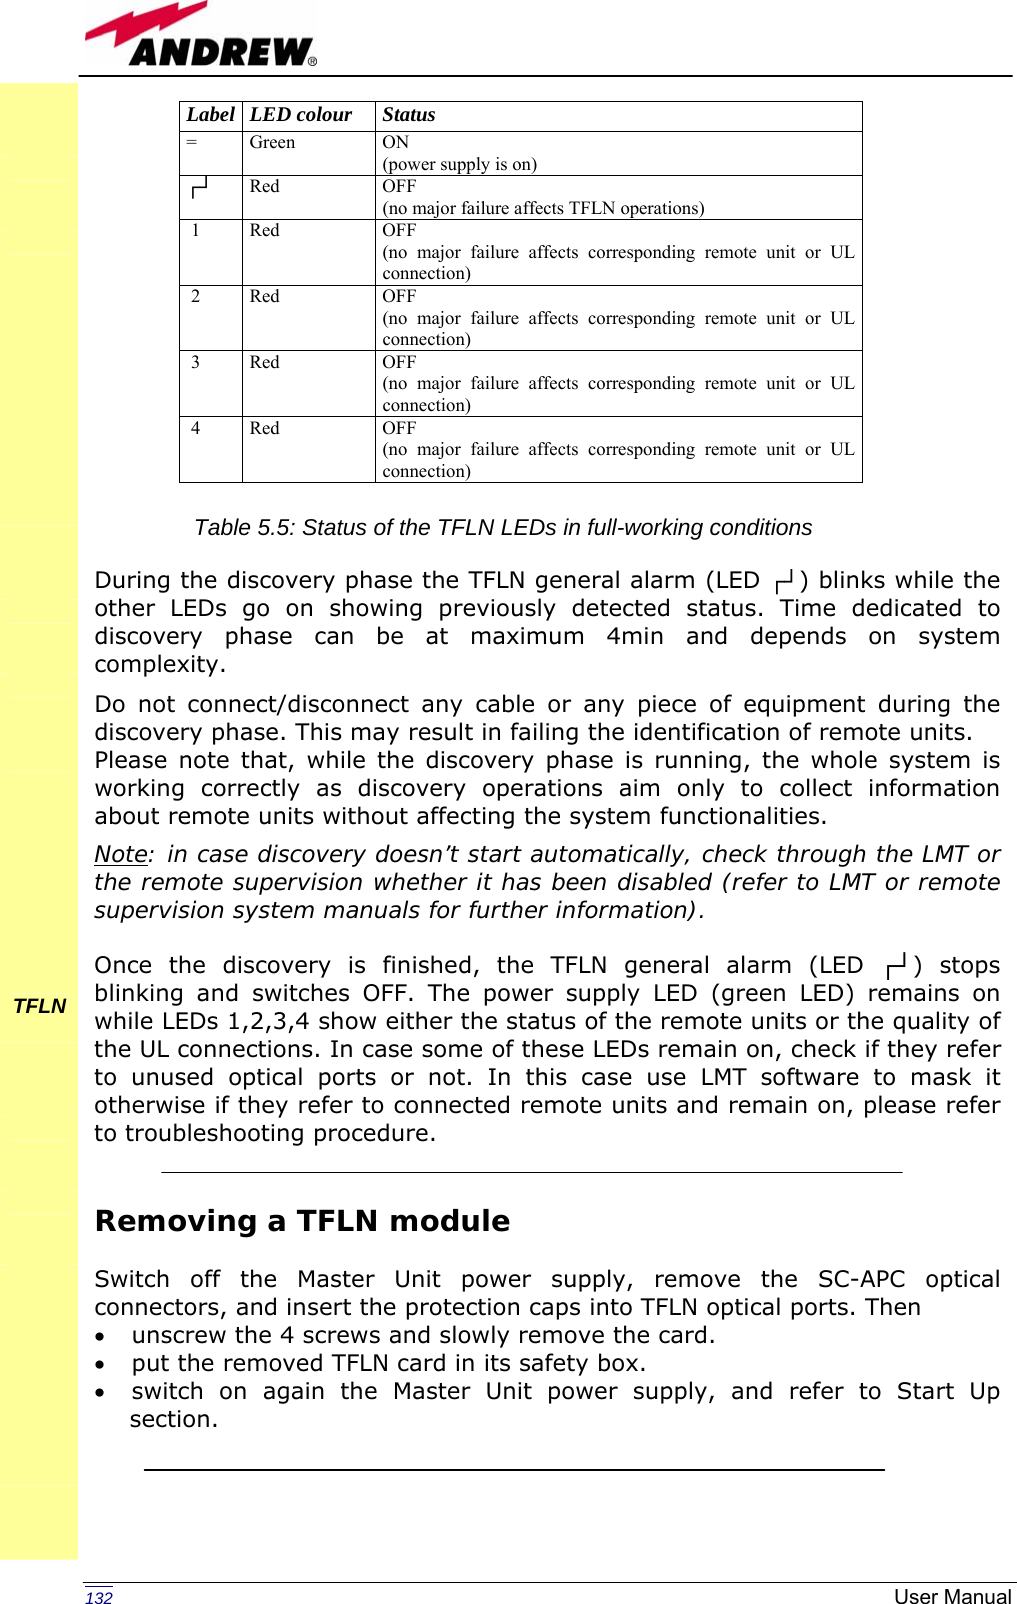   132  User Manual                 During the discovery phase the TFLN general alarm (LED ┌┘) blinks while the other LEDs go on showing previously detected status. Time dedicated to discovery phase can be at maximum 4min and depends on system complexity. Do not connect/disconnect any cable or any piece of equipment during the discovery phase. This may result in failing the identification of remote units. Please note that, while the discovery phase is running, the whole system is working correctly as discovery operations aim only to collect information about remote units without affecting the system functionalities. Note: in case discovery doesn’t start automatically, check through the LMT or the remote supervision whether it has been disabled (refer to LMT or remote supervision system manuals for further information).  Once the discovery is finished, the TFLN general alarm (LED ┌┘) stops blinking and switches OFF. The power supply LED (green LED) remains on while LEDs 1,2,3,4 show either the status of the remote units or the quality of the UL connections. In case some of these LEDs remain on, check if they refer to unused optical ports or not. In this case use LMT software to mask it otherwise if they refer to connected remote units and remain on, please refer to troubleshooting procedure.   Removing a TFLN module  Switch off the Master Unit power supply, remove the SC-APC optical connectors, and insert the protection caps into TFLN optical ports. Then  • unscrew the 4 screws and slowly remove the card. • put the removed TFLN card in its safety box. • switch on again the Master Unit power supply, and refer to Start Up section.     Label LED colour  Status = Green  ON (power supply is on) ┌┘ Red OFF (no major failure affects TFLN operations)  1  Red  OFF (no major failure affects corresponding remote unit or UL connection)  2  Red  OFF (no major failure affects corresponding remote unit or UL connection)  3  Red  OFF (no major failure affects corresponding remote unit or UL connection)  4  Red  OFF (no major failure affects corresponding remote unit or UL connection)             TFLN        Table 5.5: Status of the TFLN LEDs in full-working conditions 